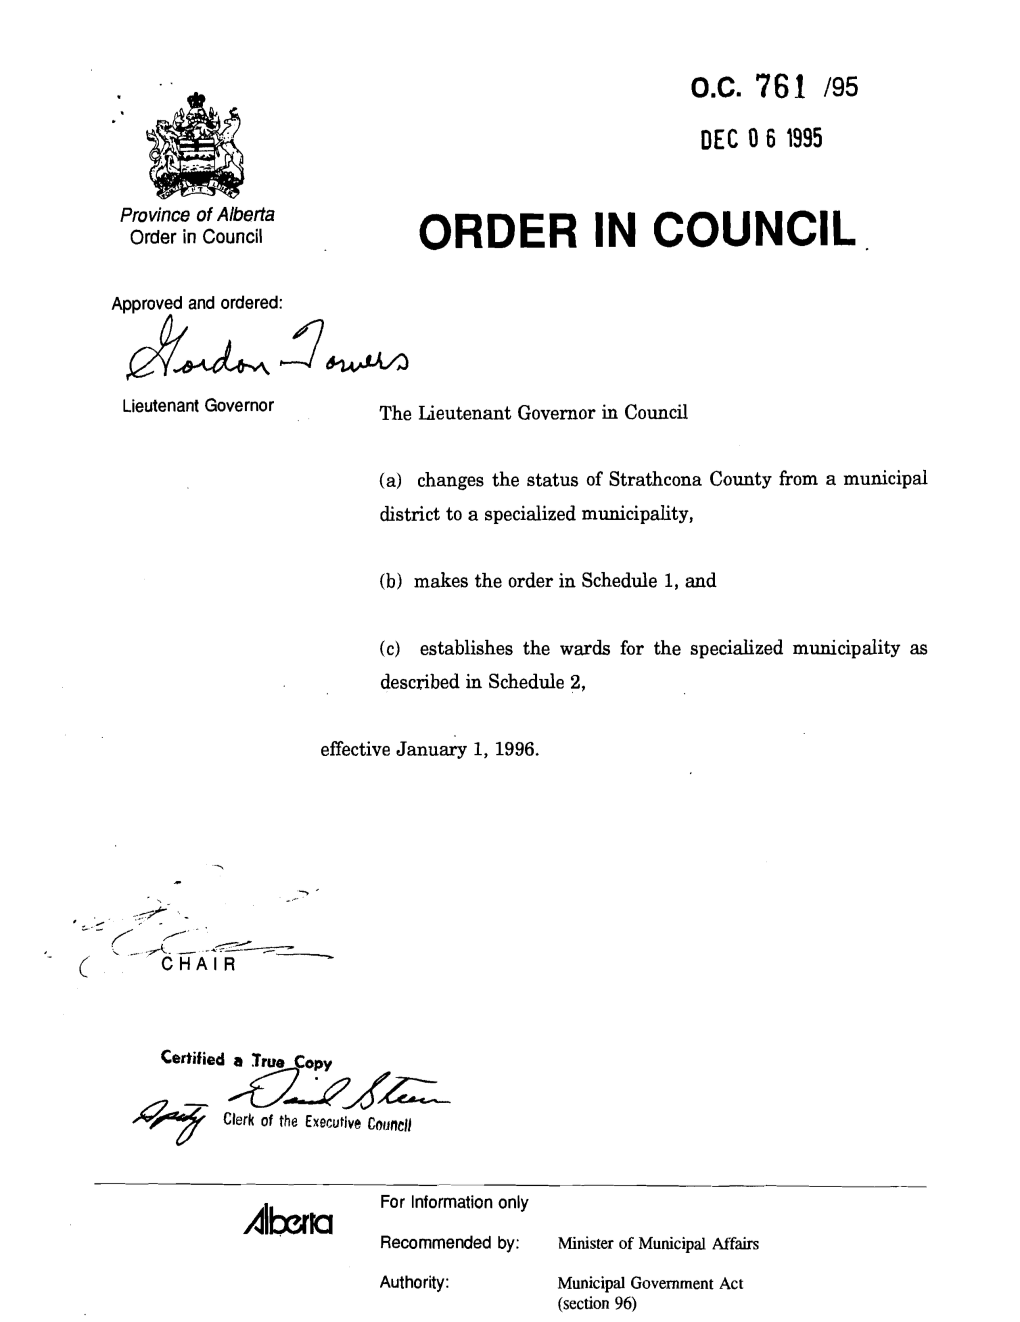 Order in Council ORDER in COUNCIL